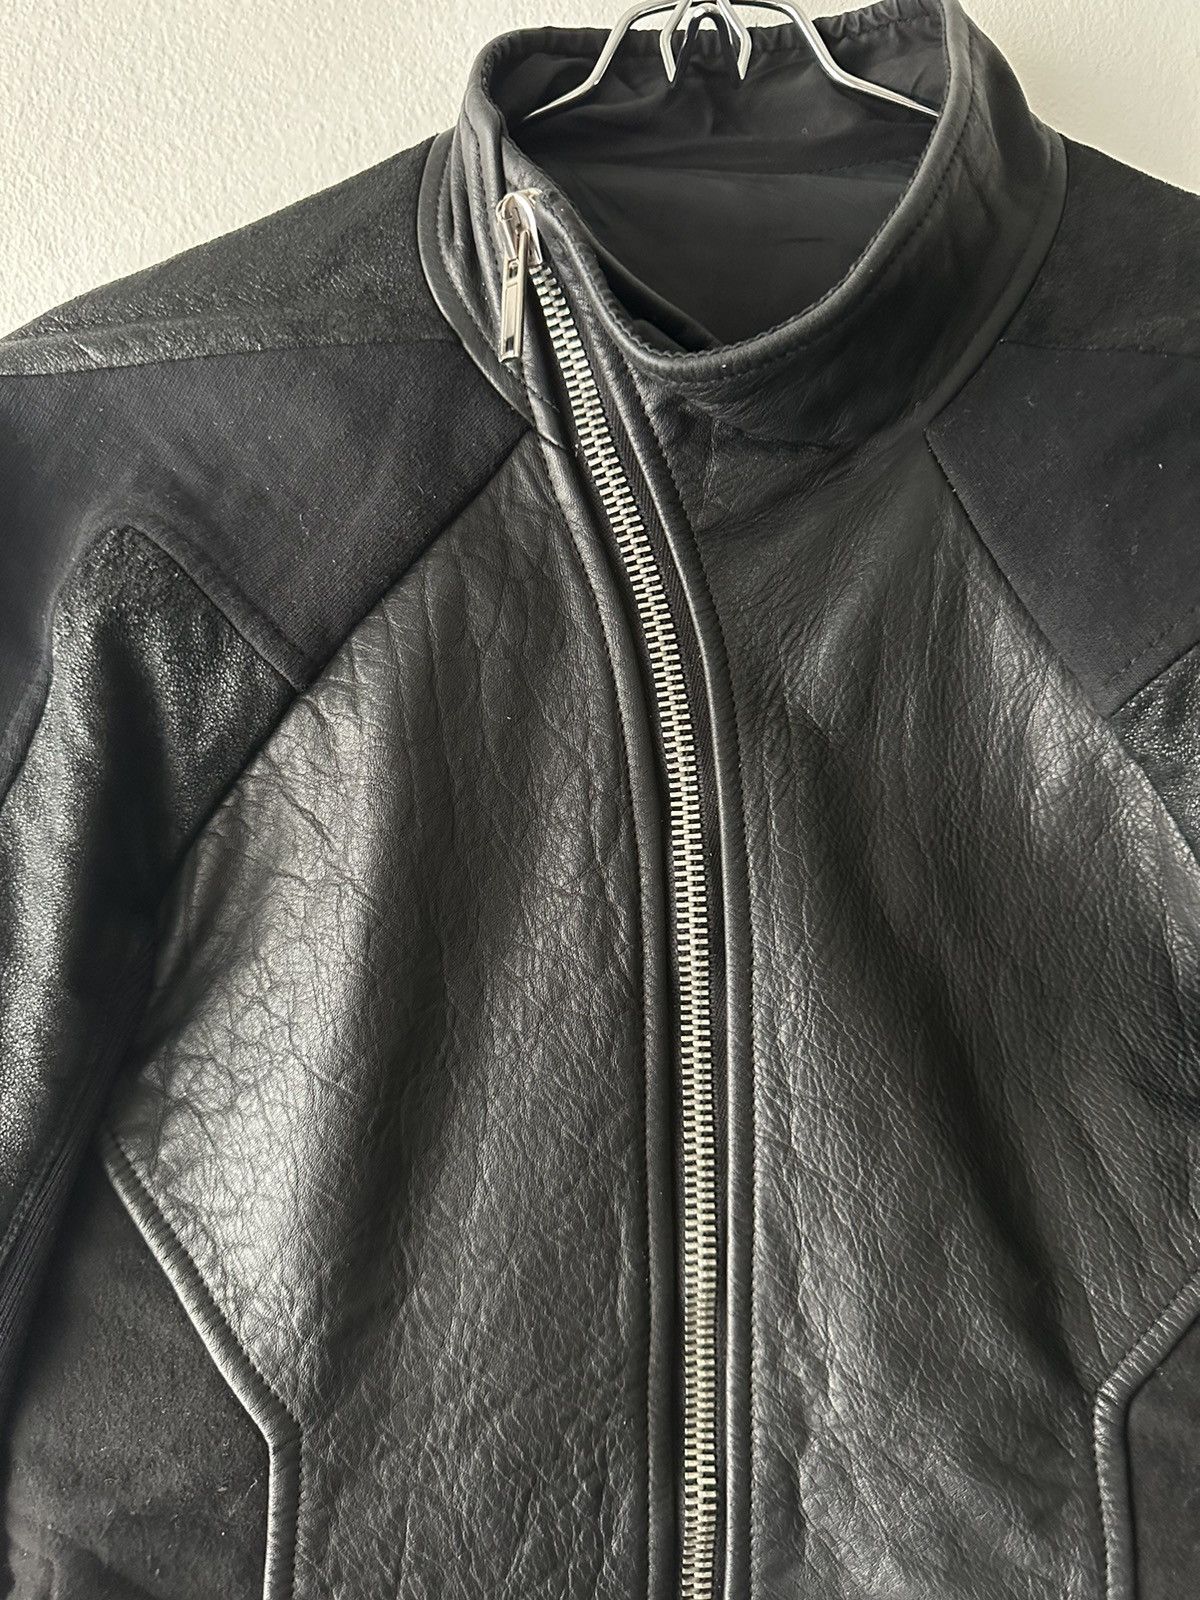 Rick Owens FW11 Limo Combo Leather Jacket | Grailed